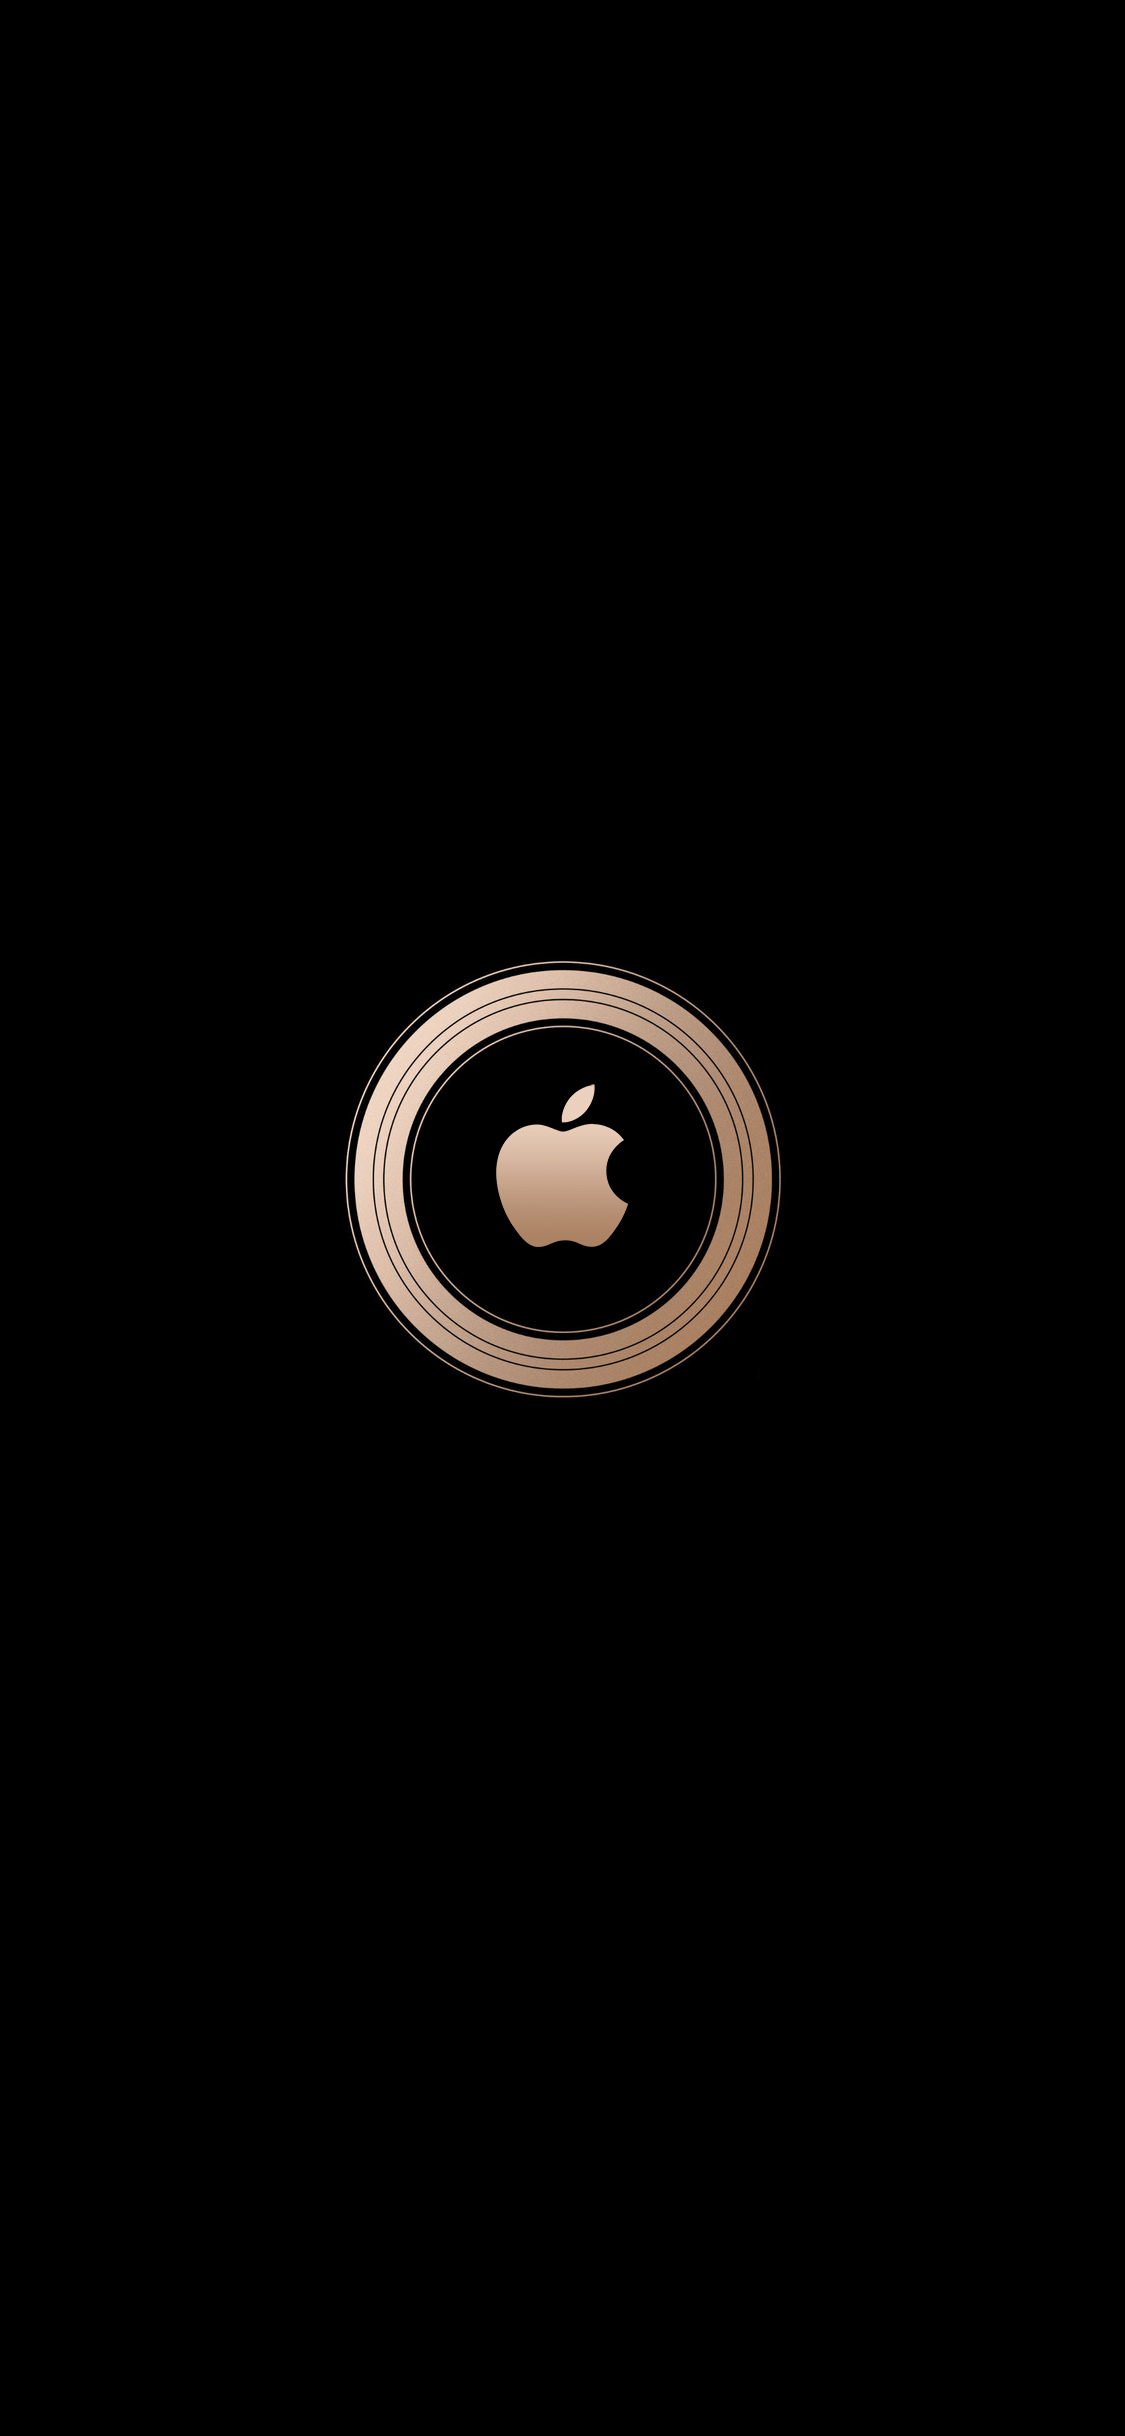 Black And Gold Apple Wallpapers Top Free Black And Gold Apple Backgrounds Wallpaperaccess